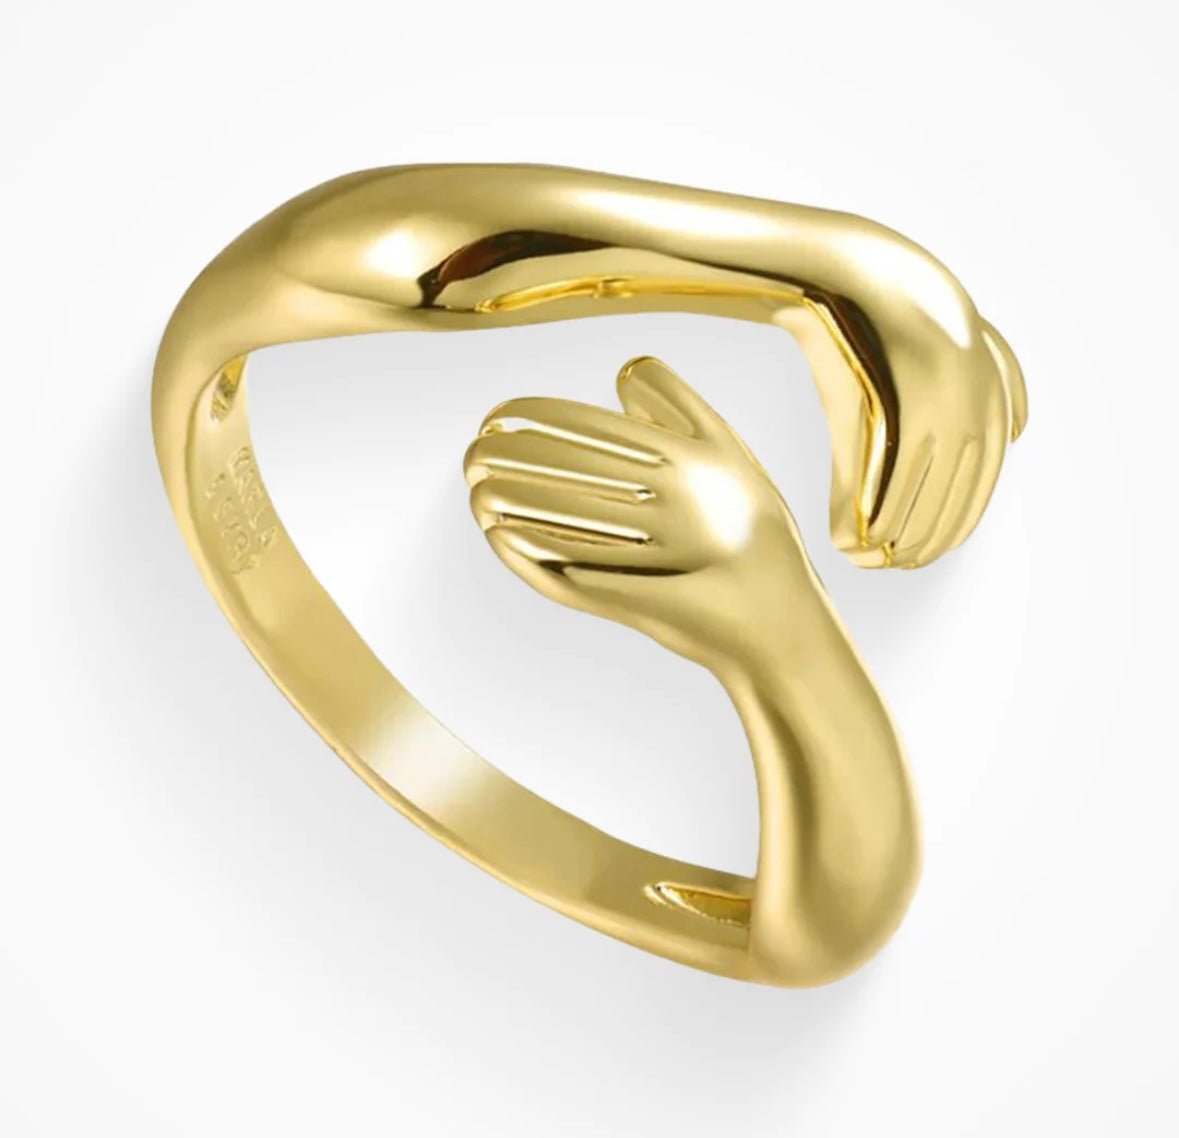 Arms Wrapped Ring - Water Resistant